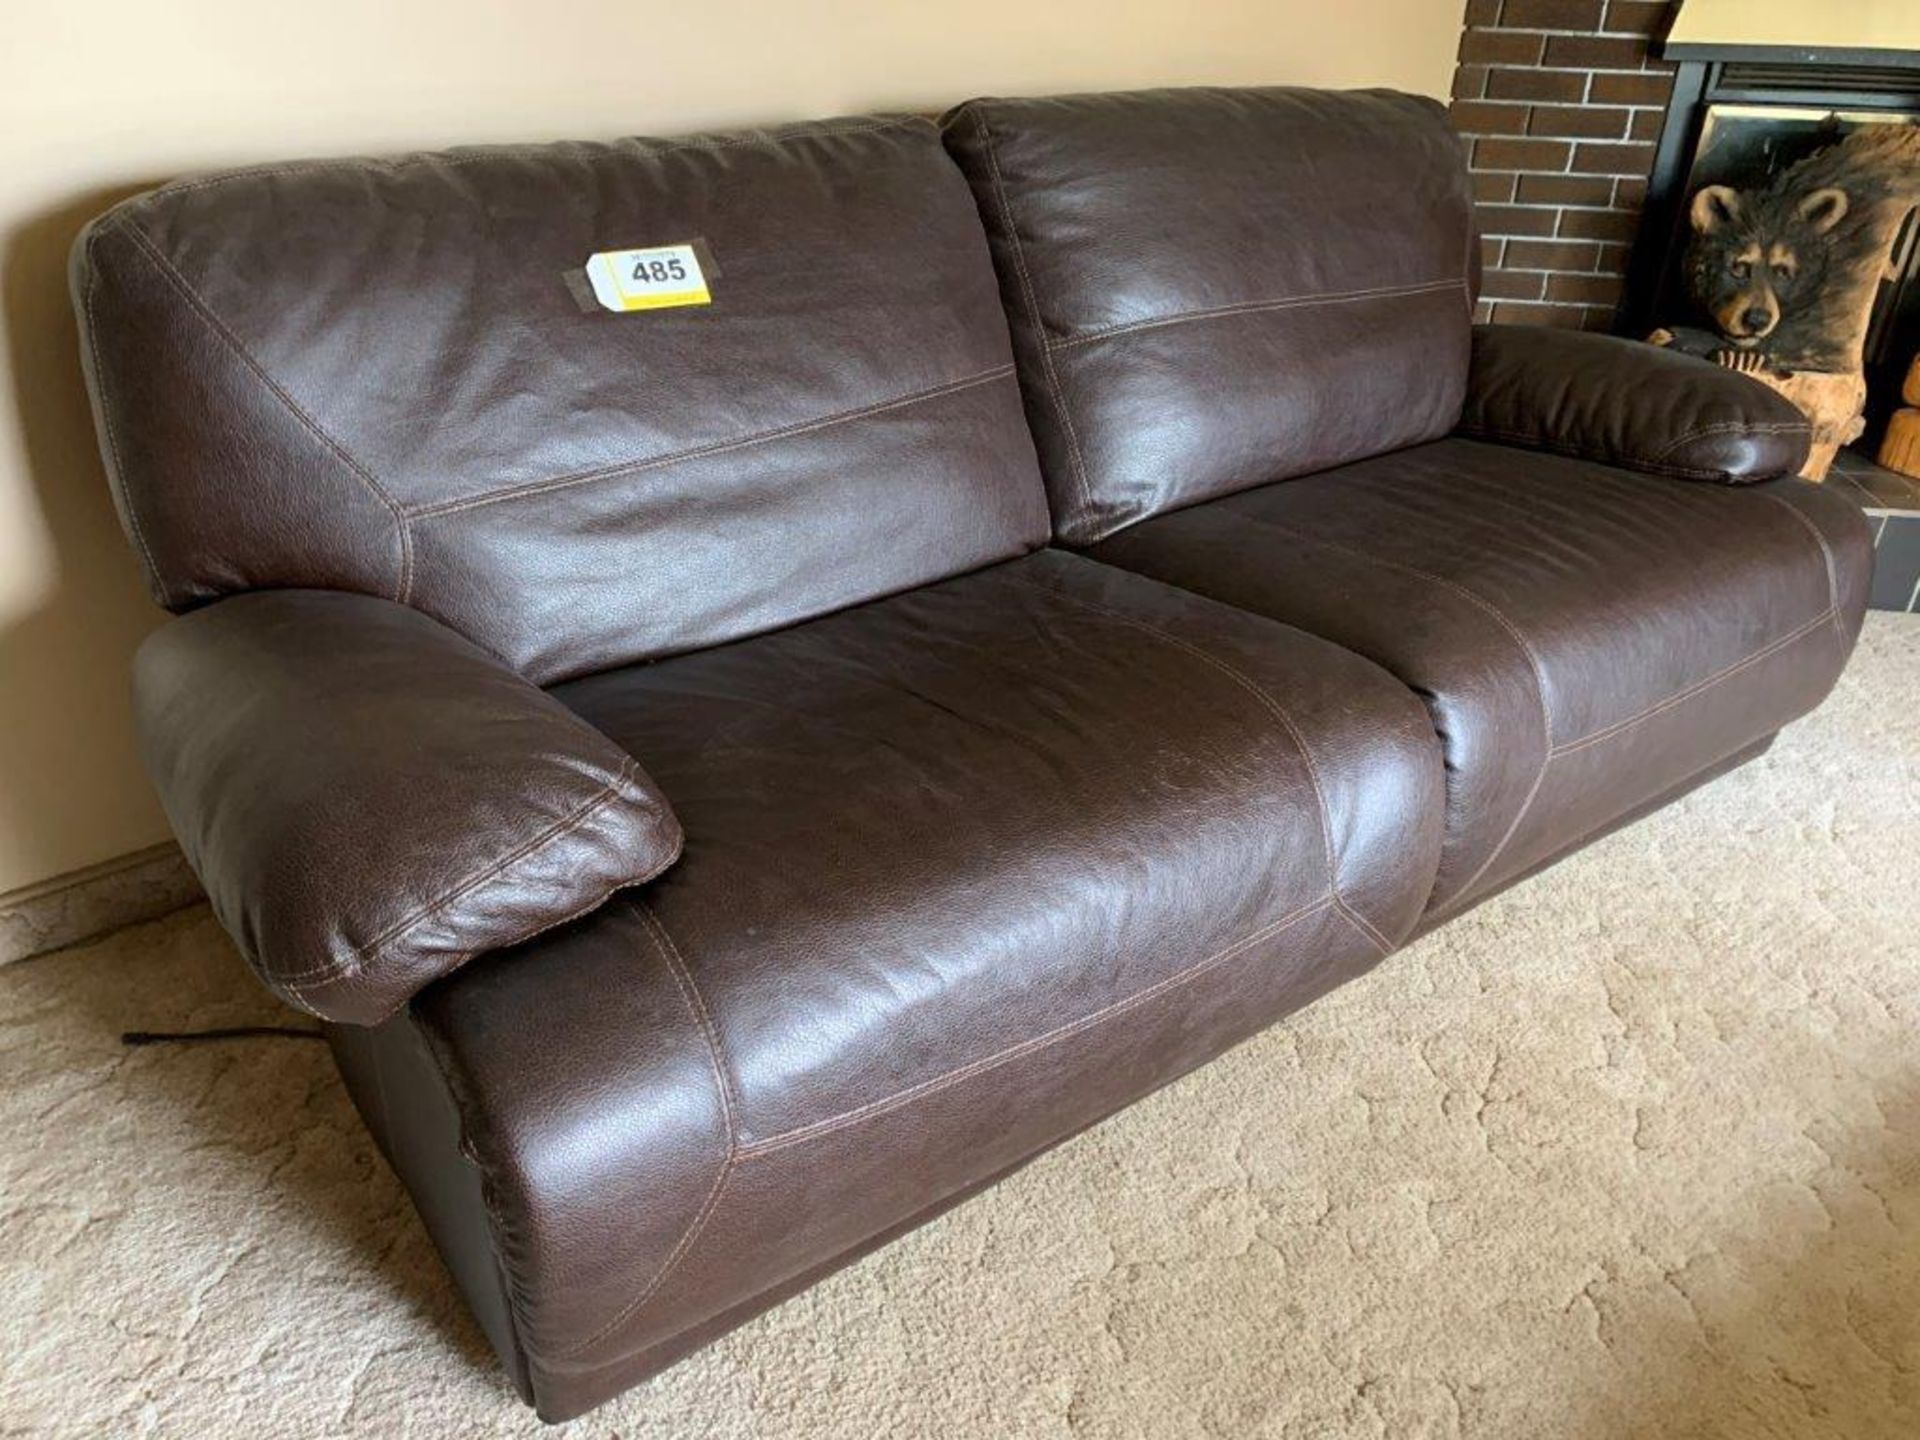 LEATHER SOFA AND CHAIR, 1-CLOTH RECLINER CHAIR